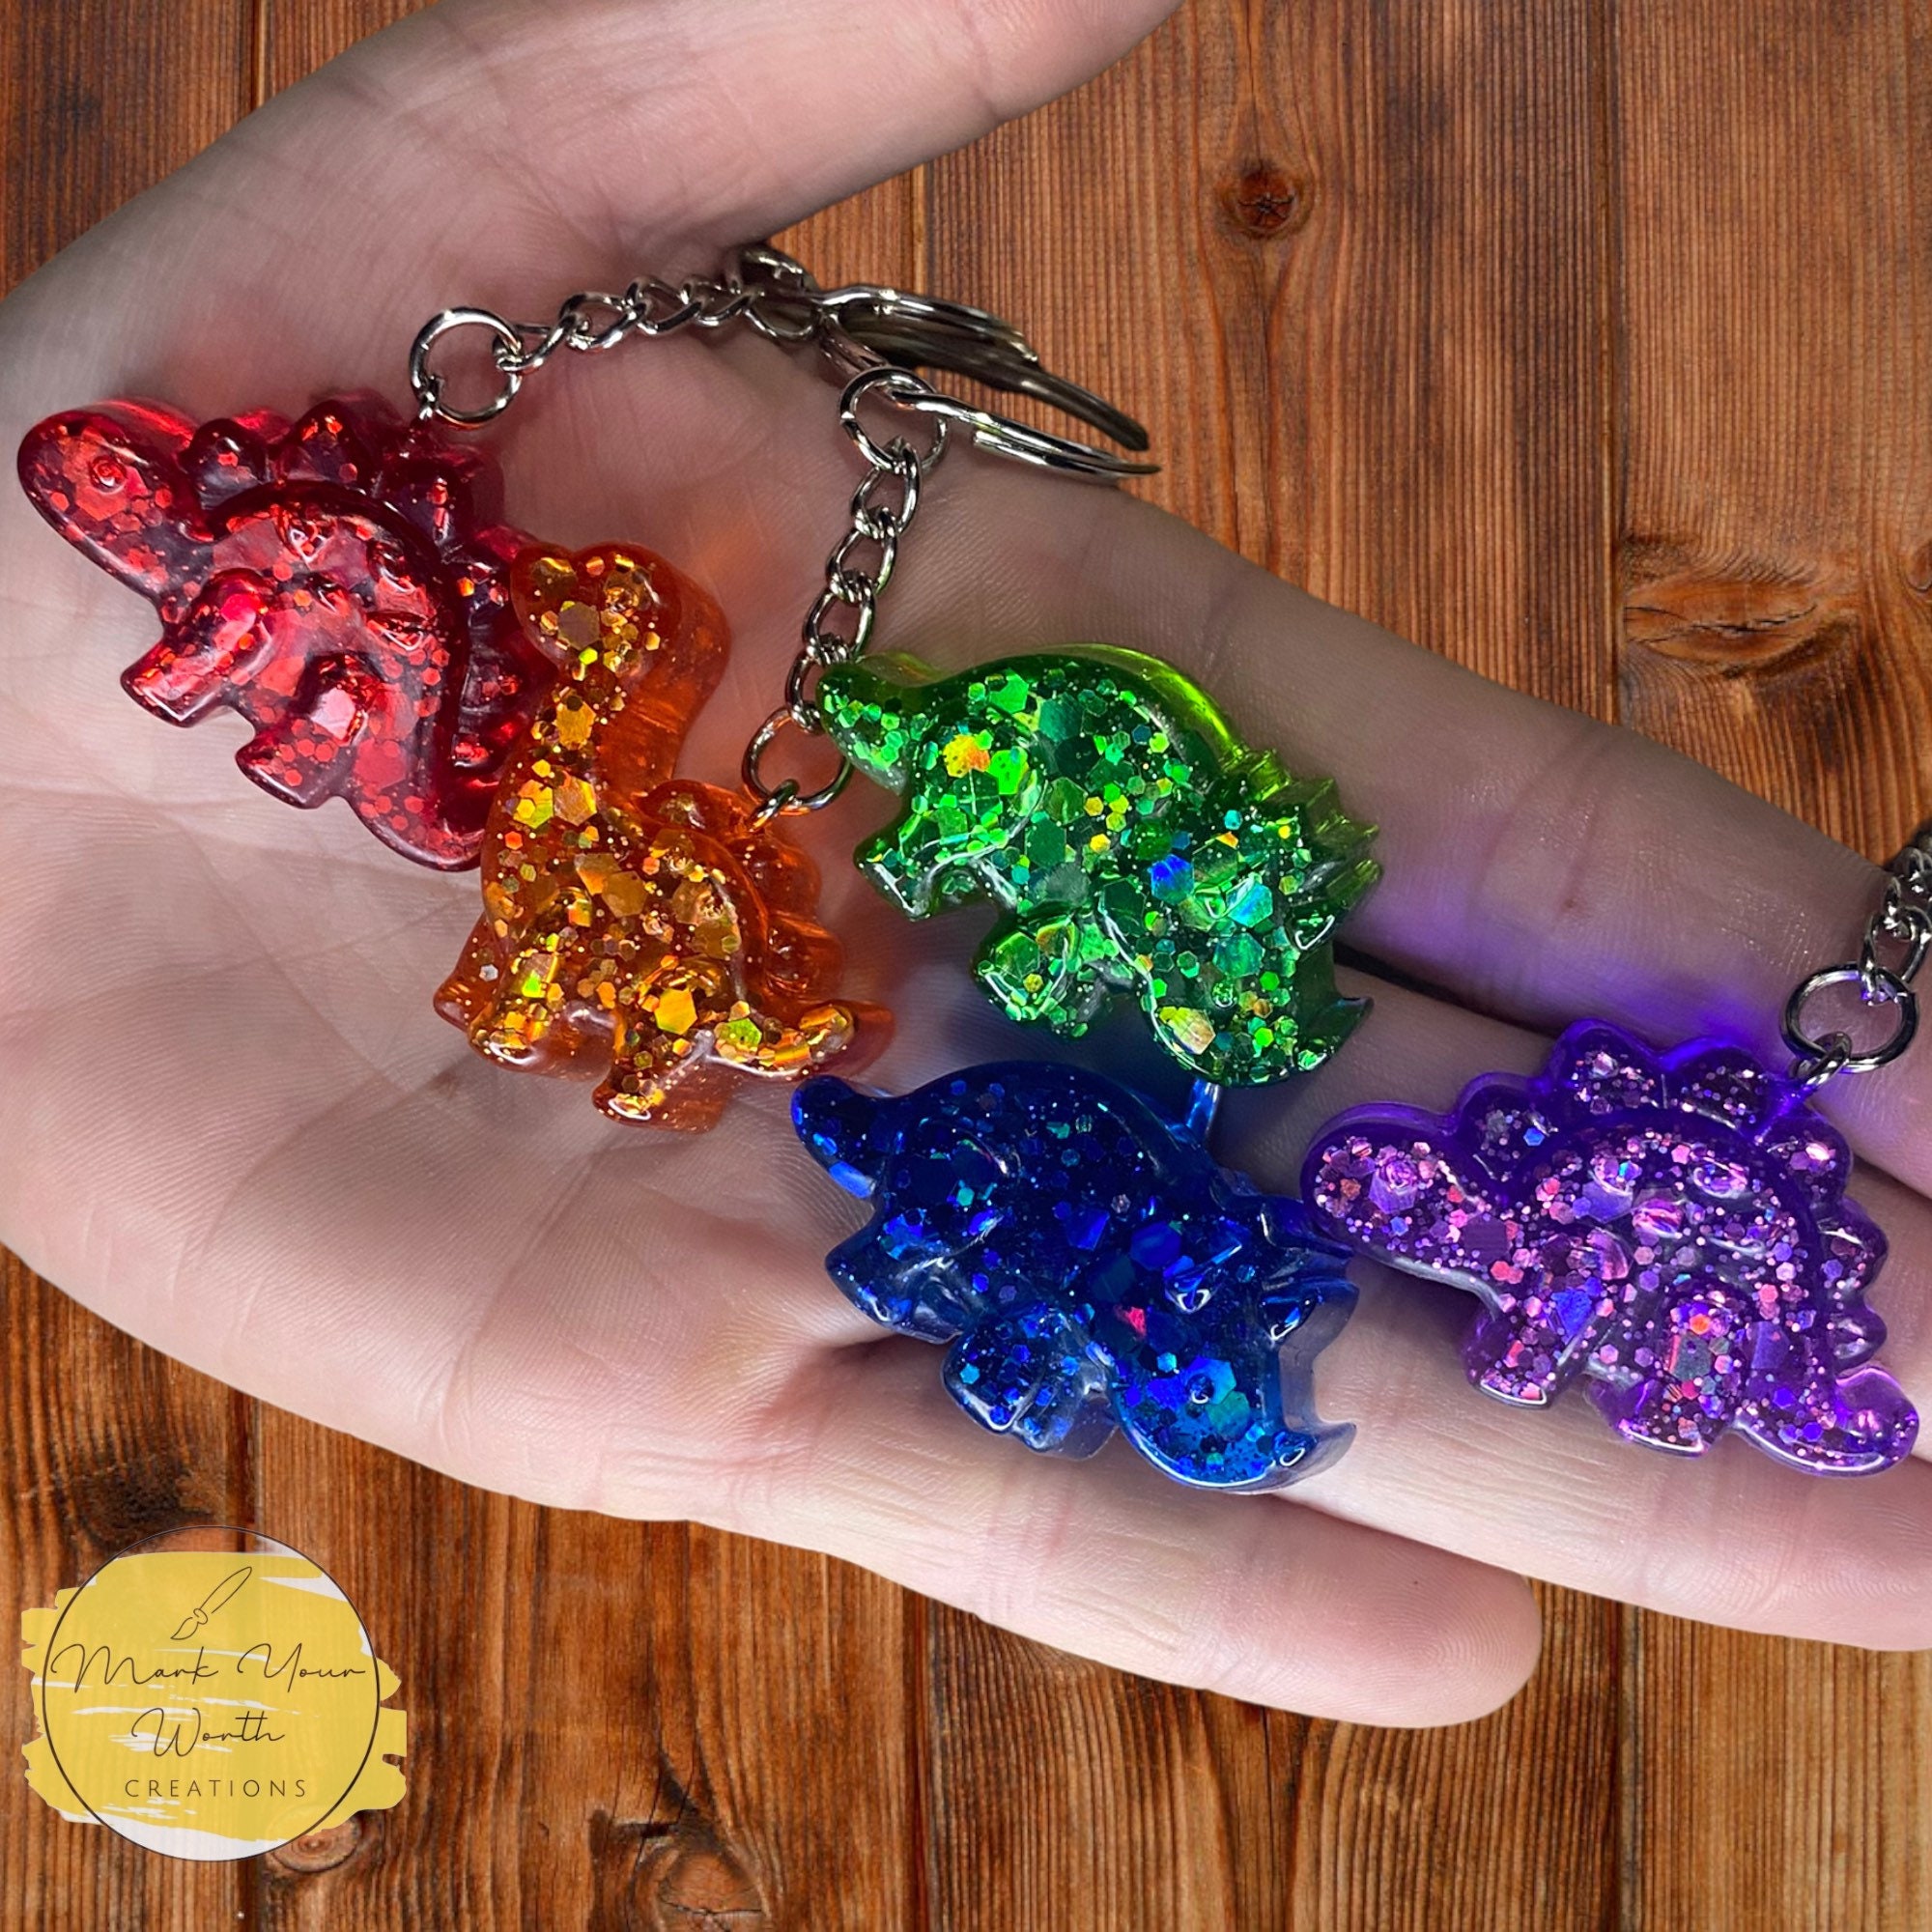 Dinosaur Family Mold Shiny Silicone / T-rex or Triceratops / Key Chain /  DIY Jewelry / Prehistoric Teaching Aid / Ornaments 